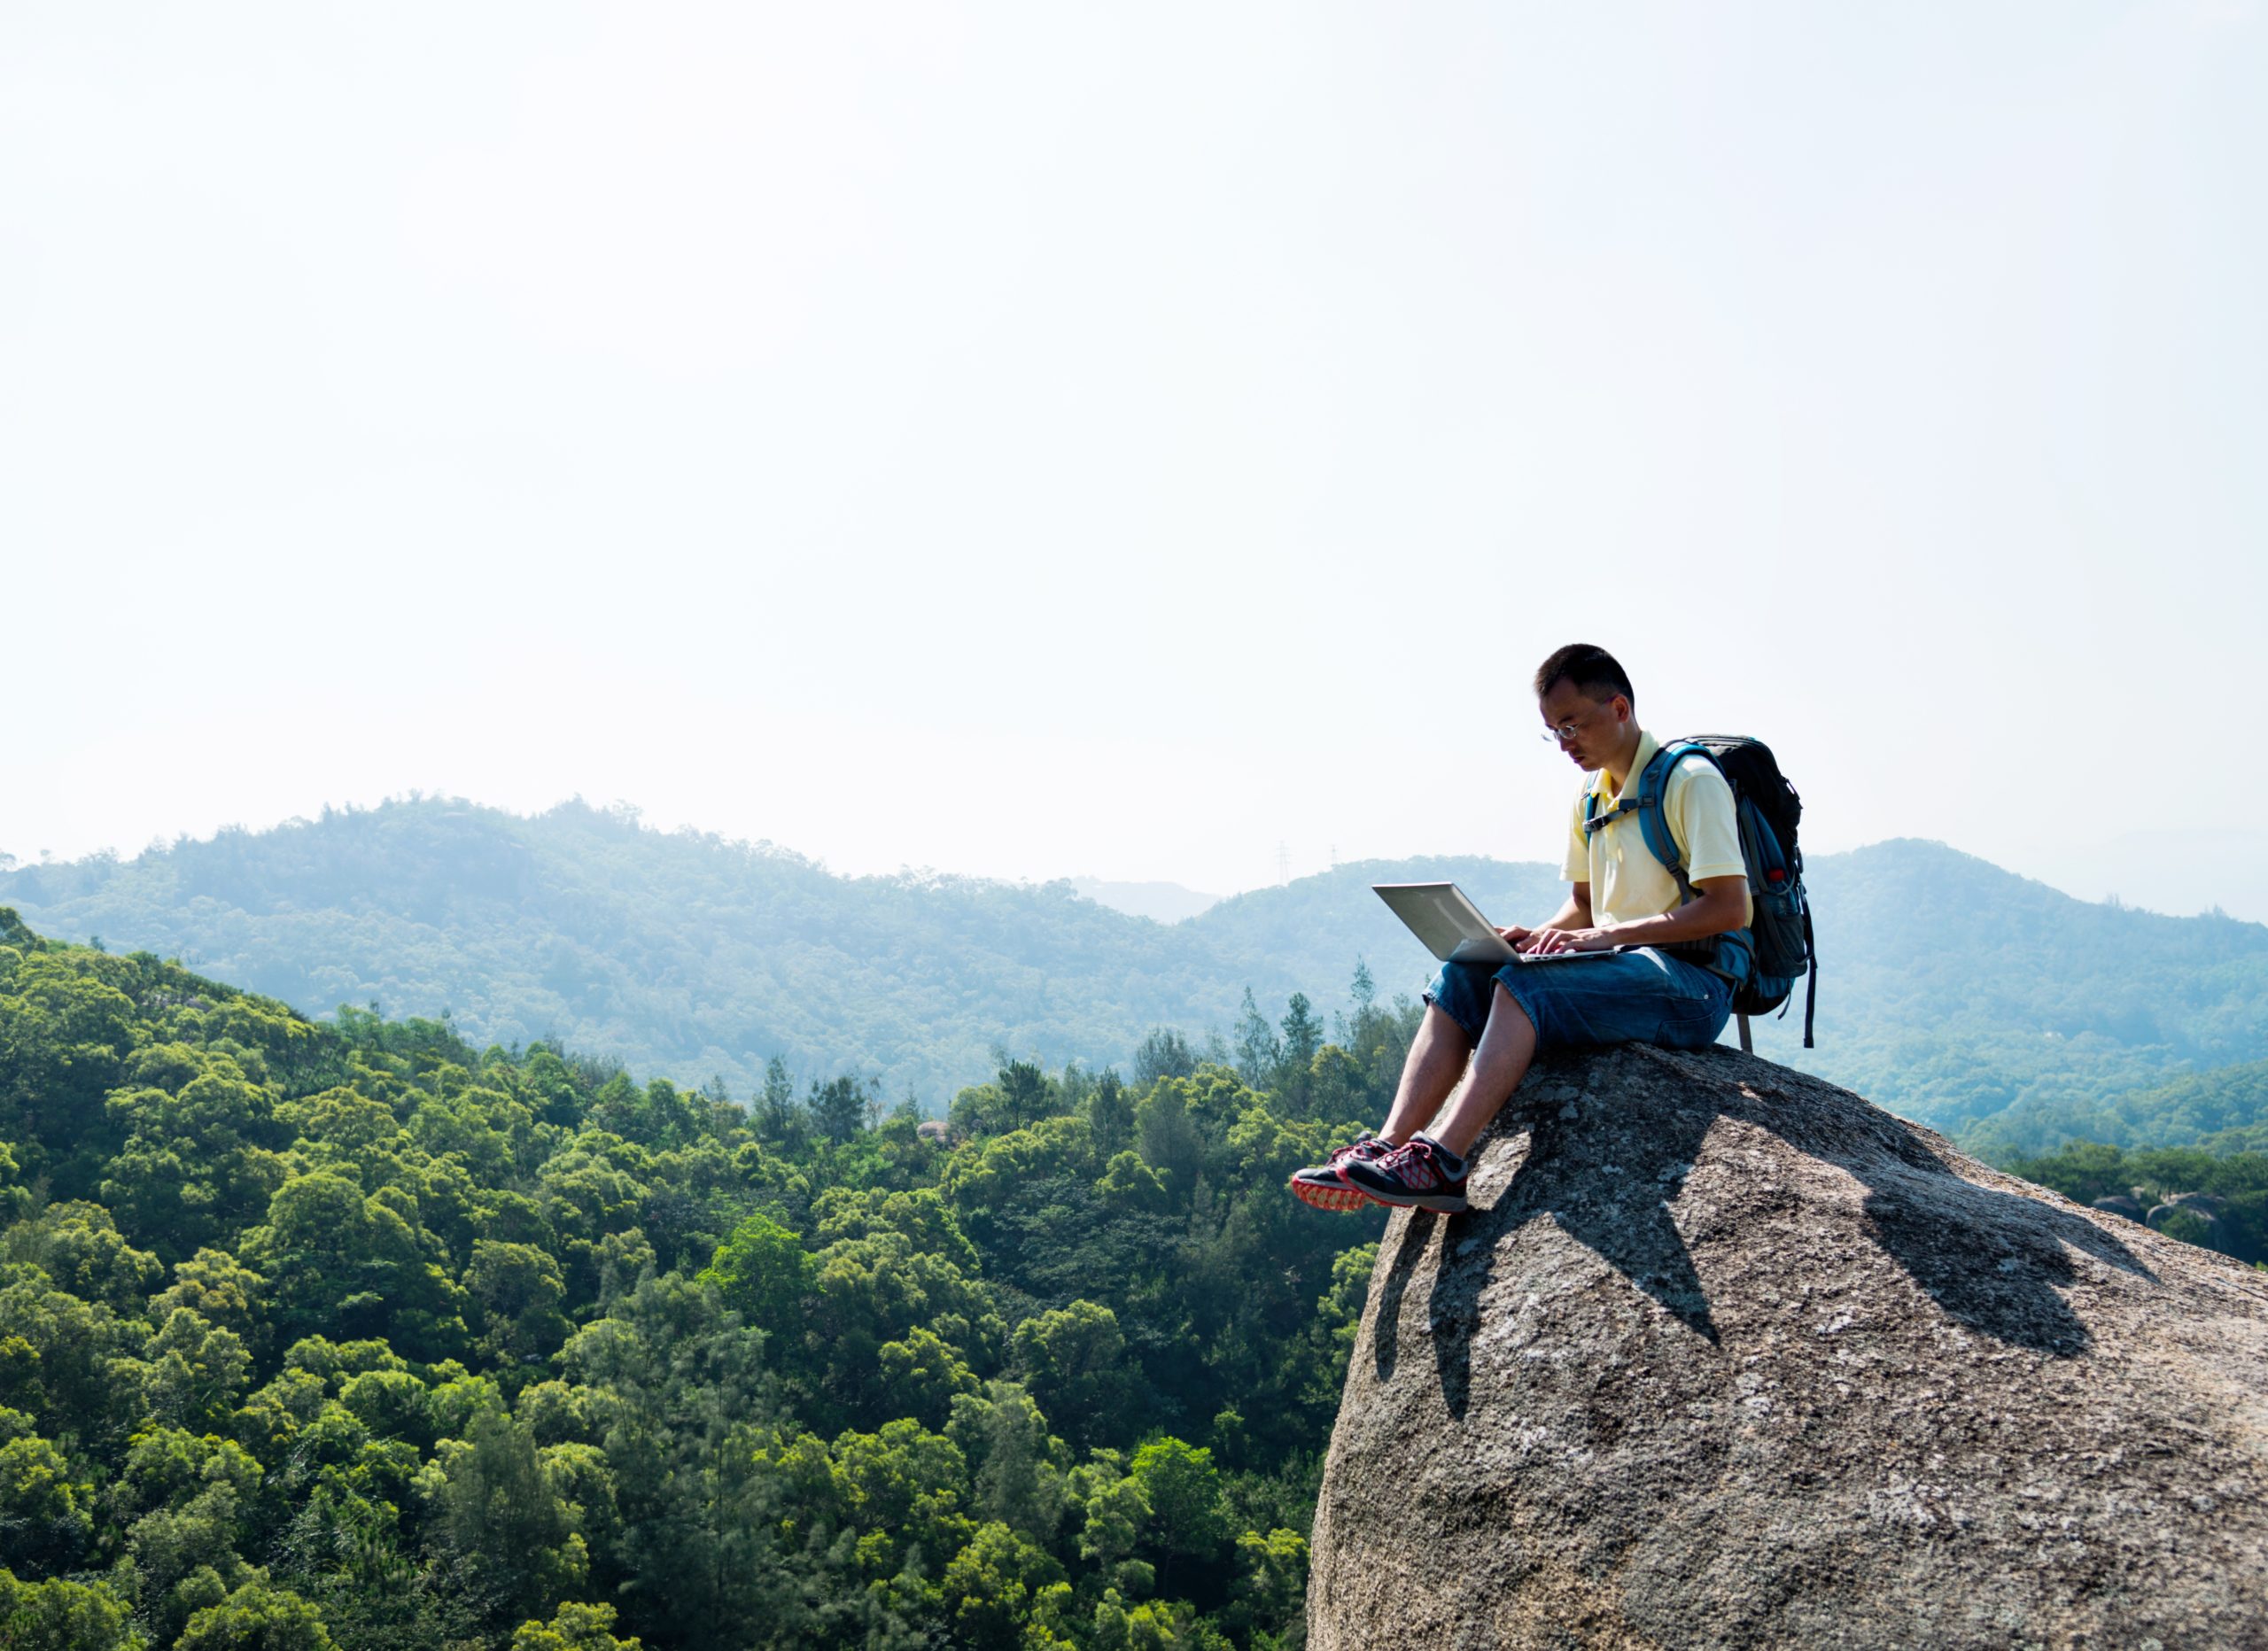 Telecommuting not only cuts costs, but also saves travel time. Allow your employees to work from wherever they choose.